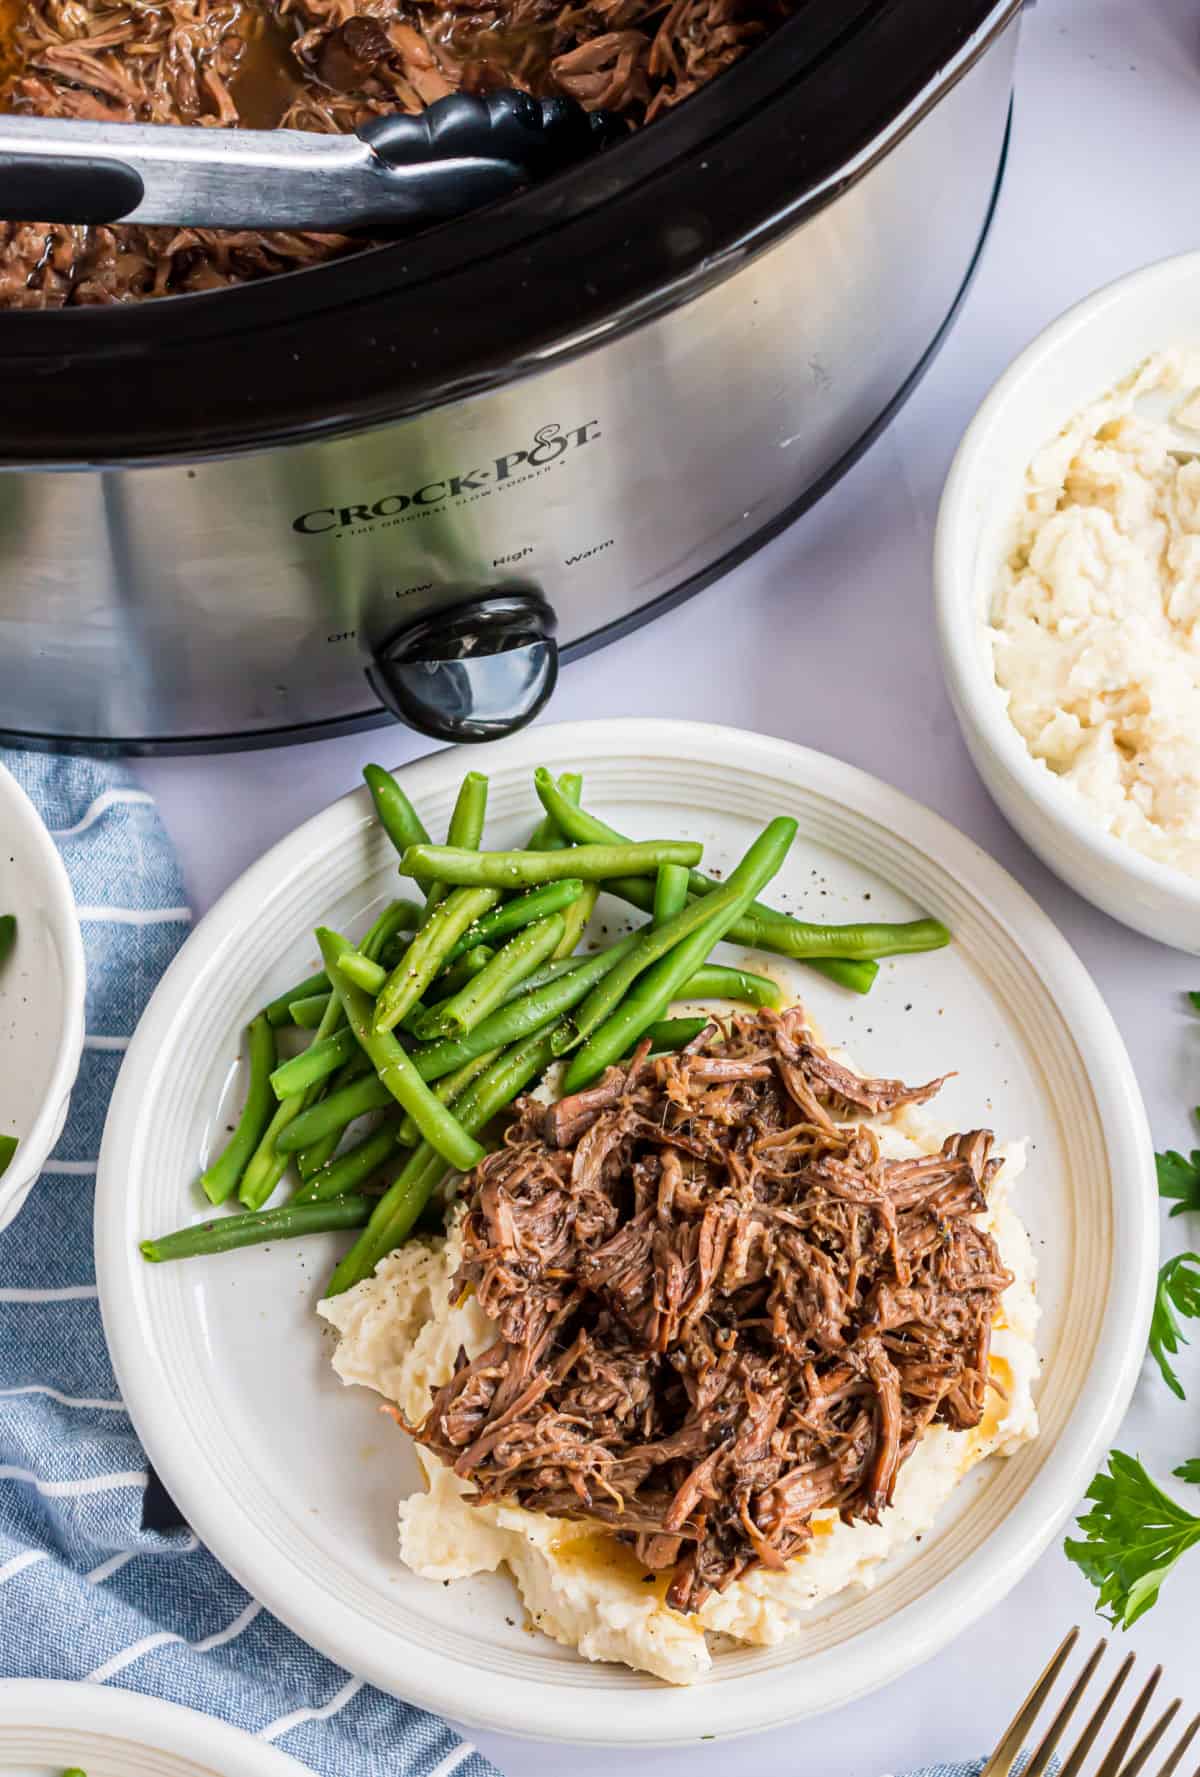 Shredded beef served over mashed potatoes and a side of green beans.